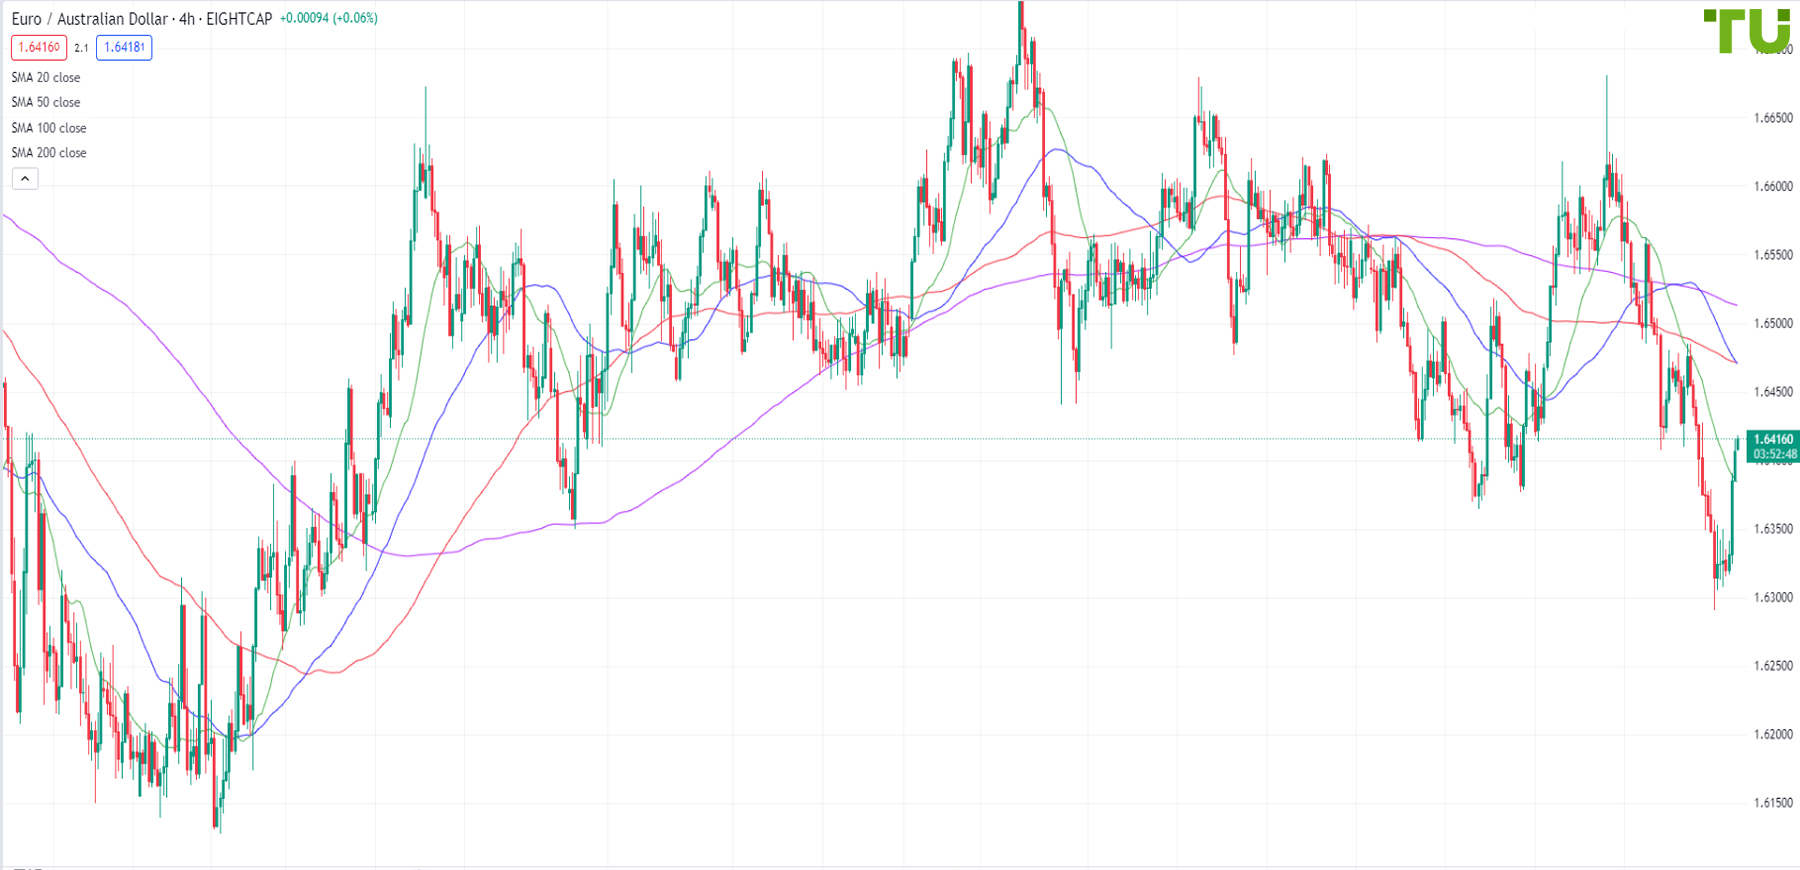 EUR/AUD is recovering after a decline